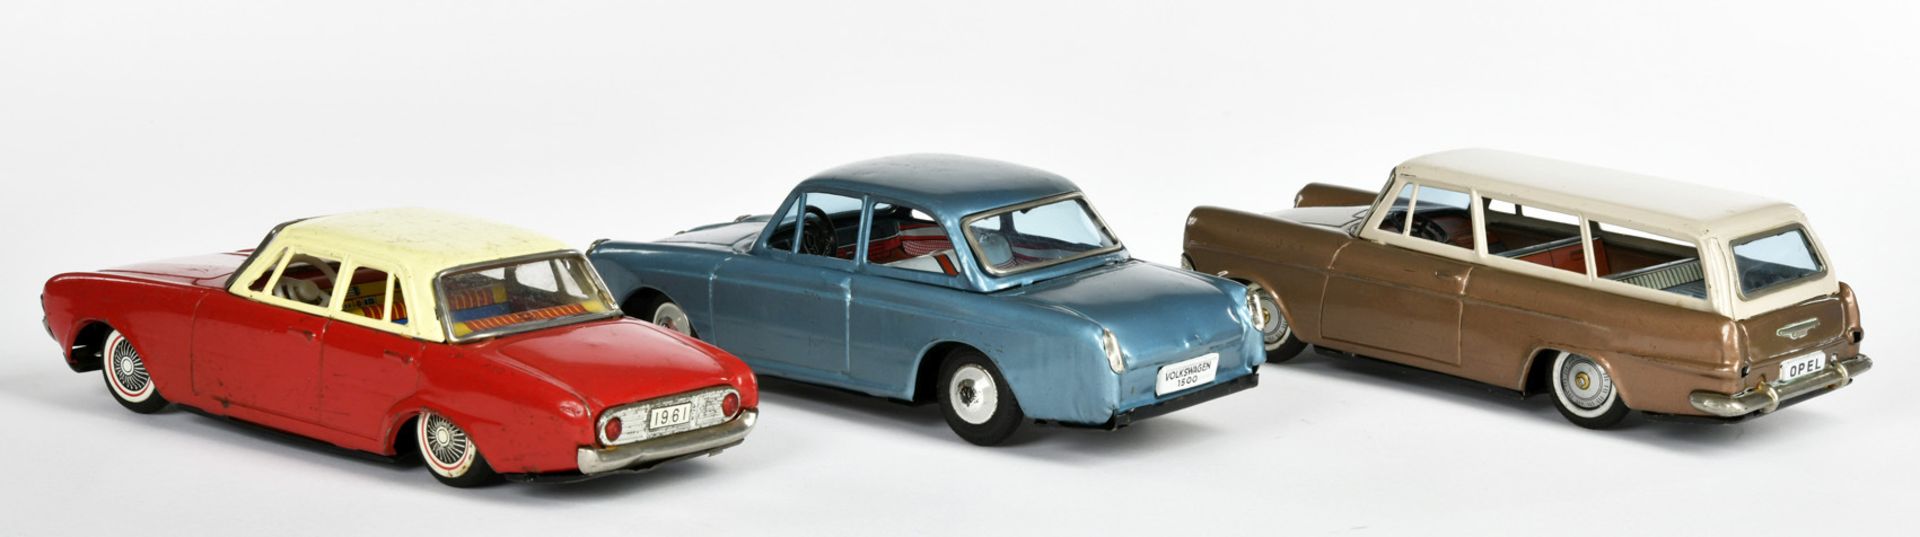 Bandai a.o., VW 1500, Opel Record + Ford Taunus, Japan, 20 cm, tin, friction ok, paint d., C 2-3 - Image 2 of 3